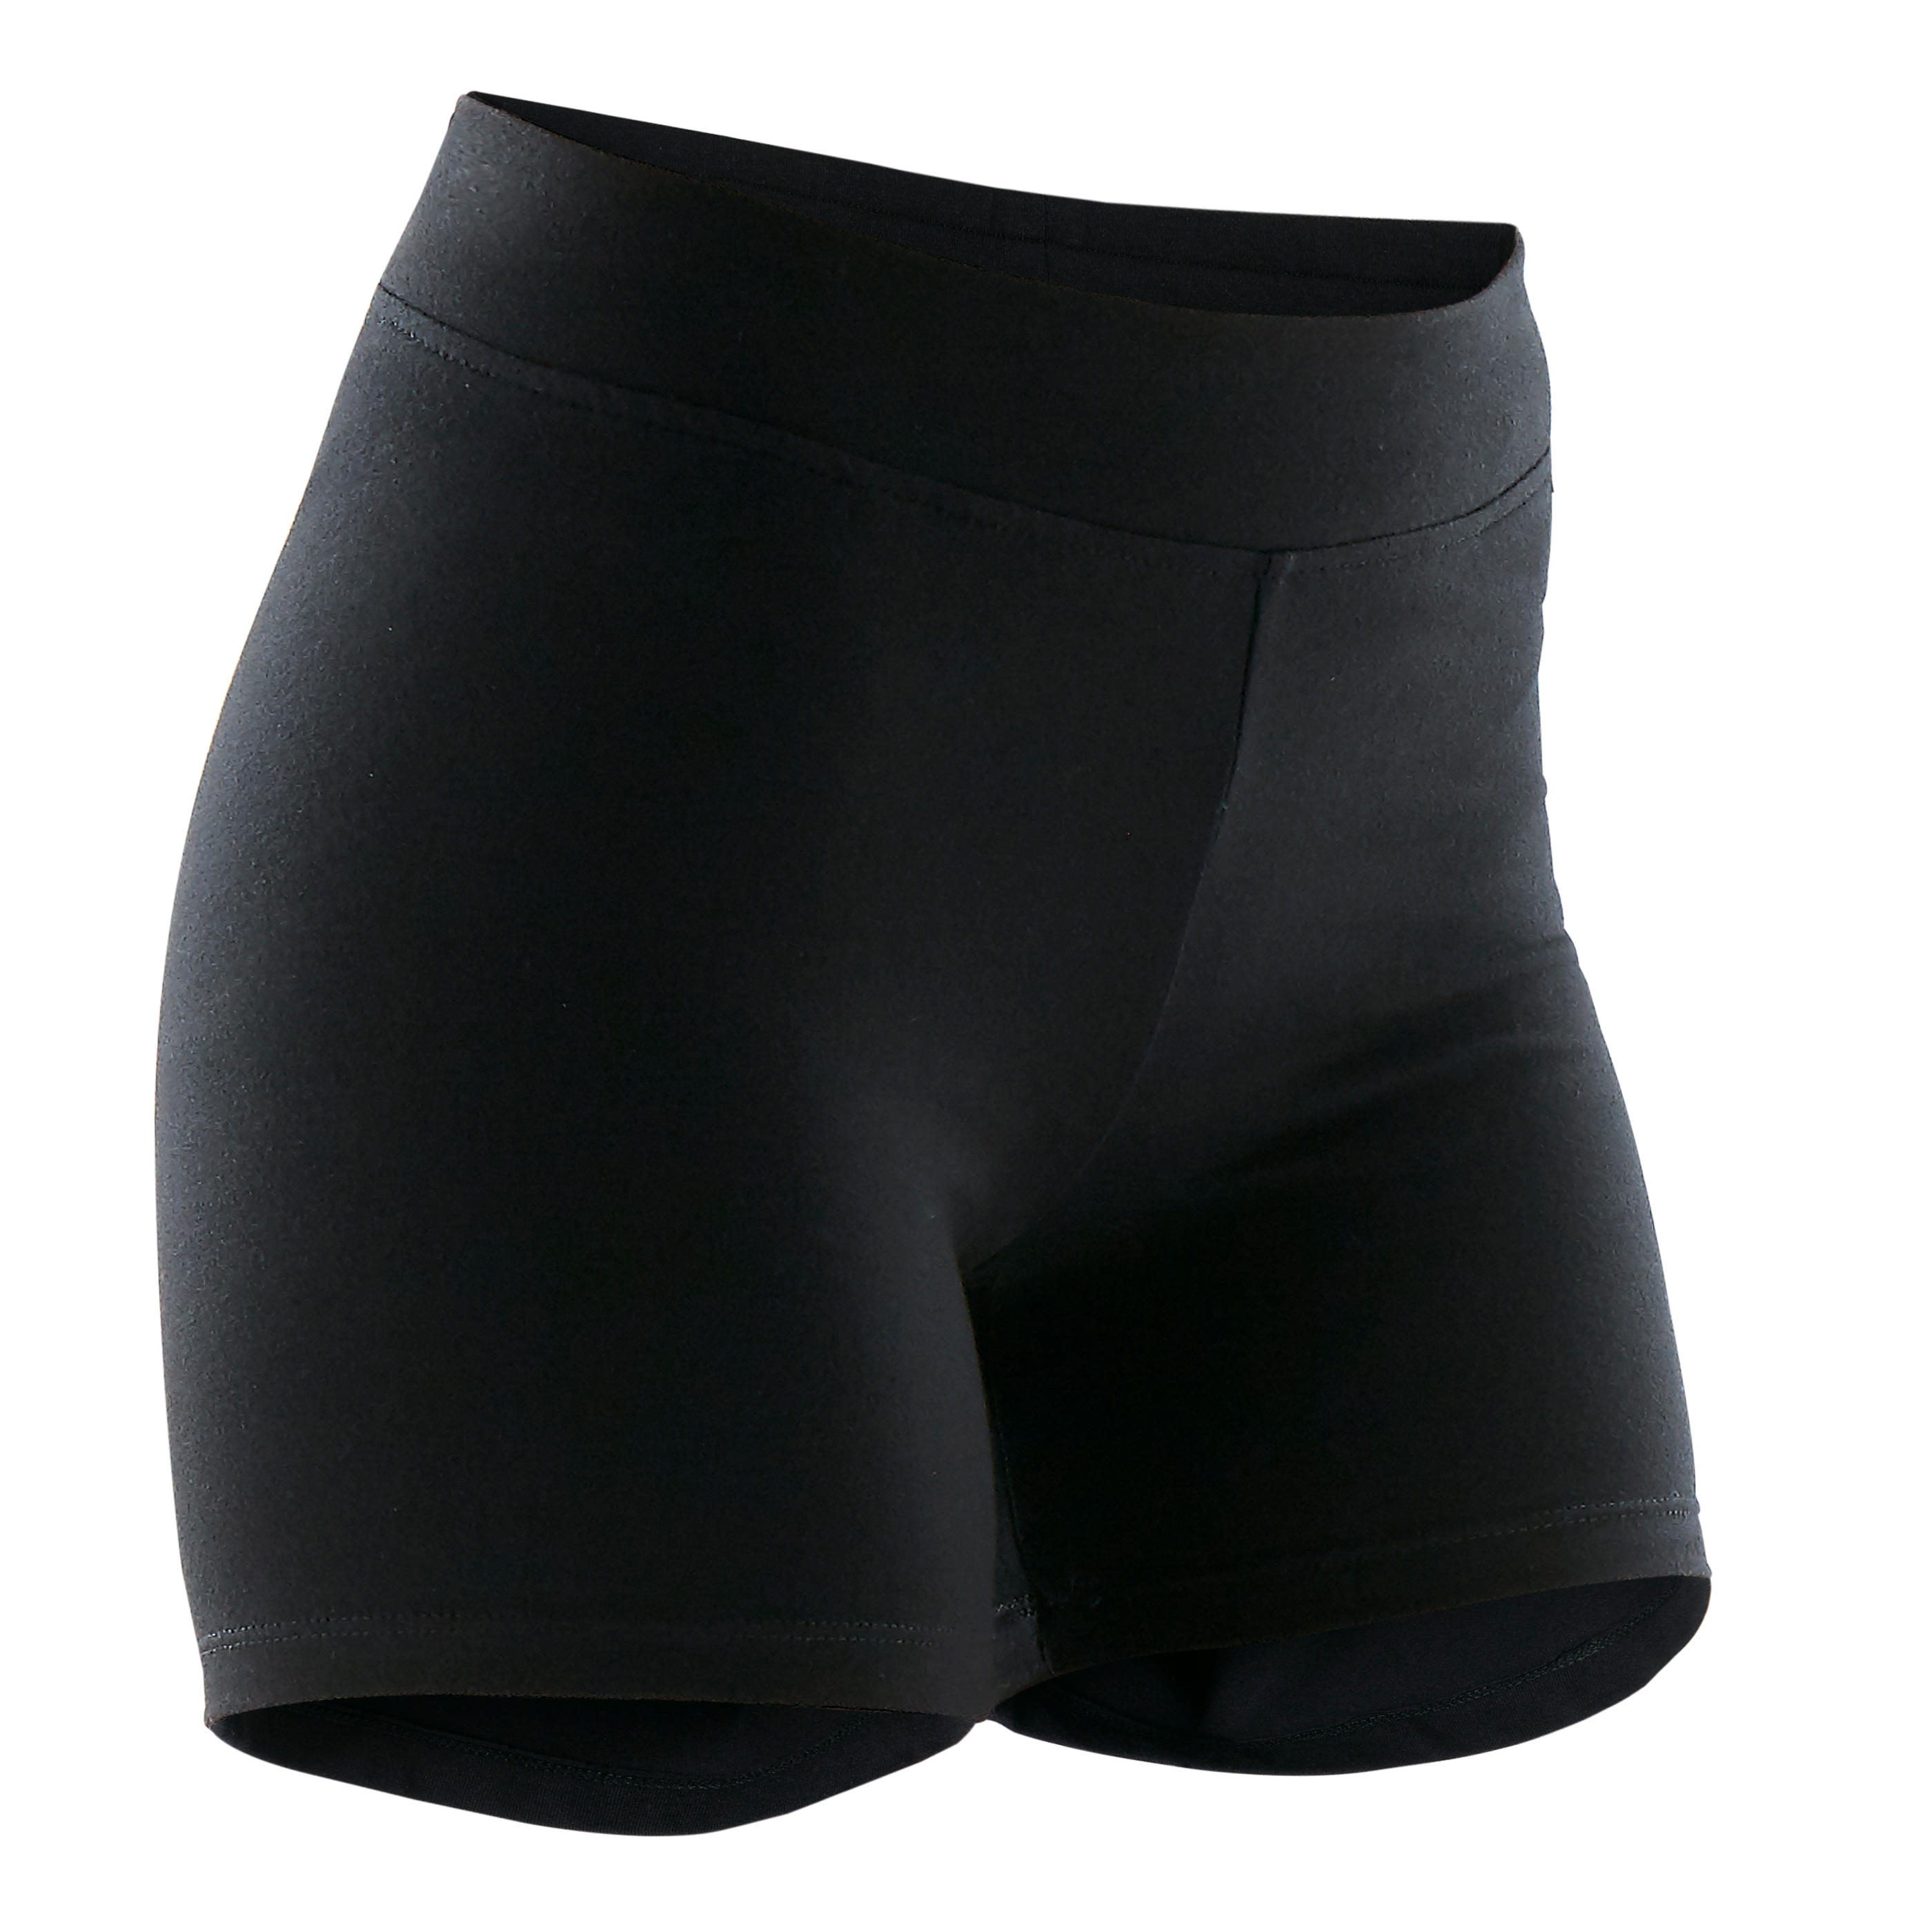 Women's Fitted Fitness Cardio Shorts - Black